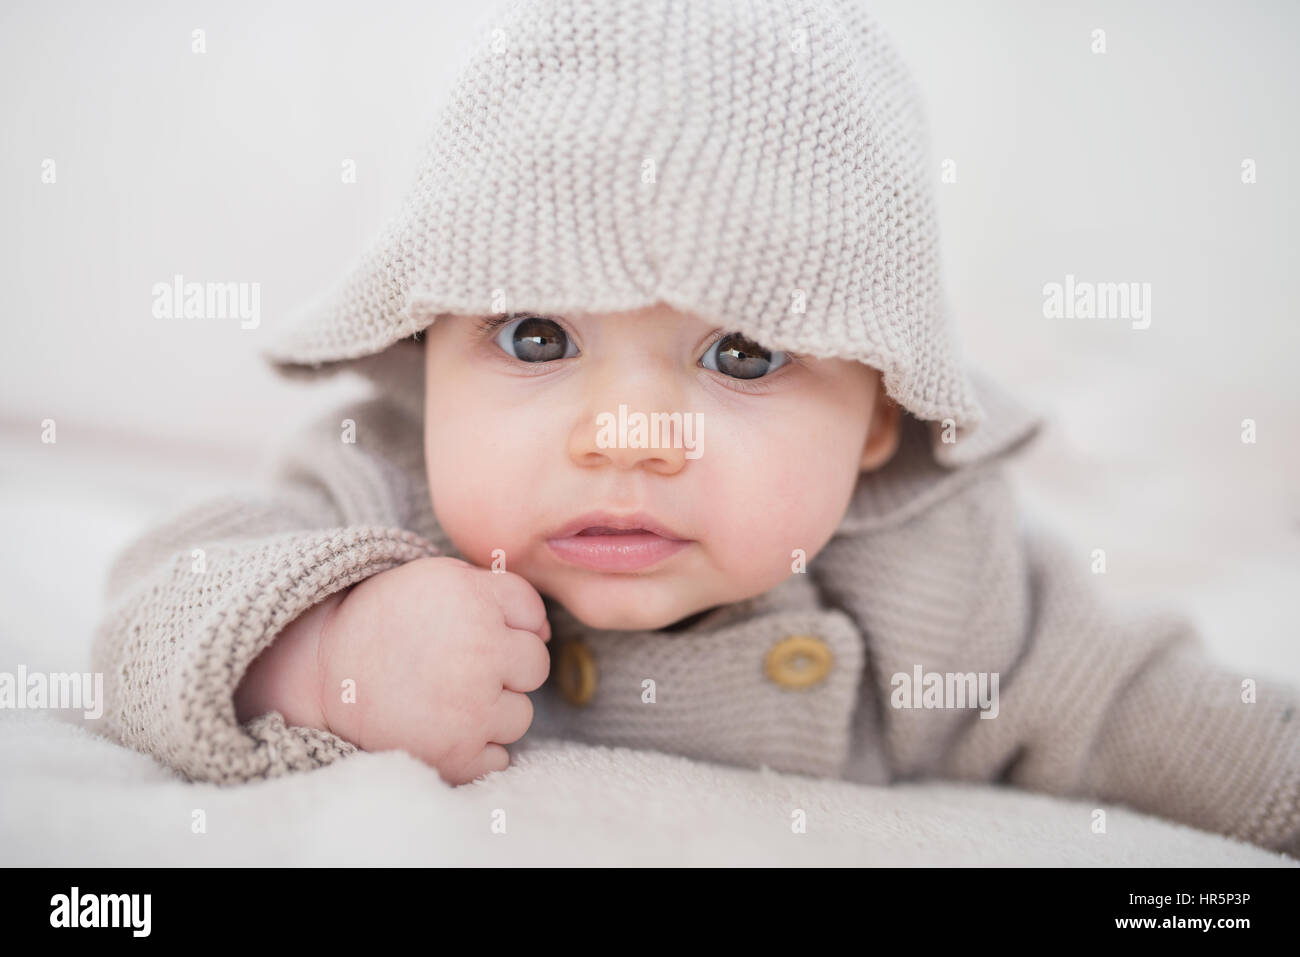 Portrait of baby awake, looking at the camera Stock Photo